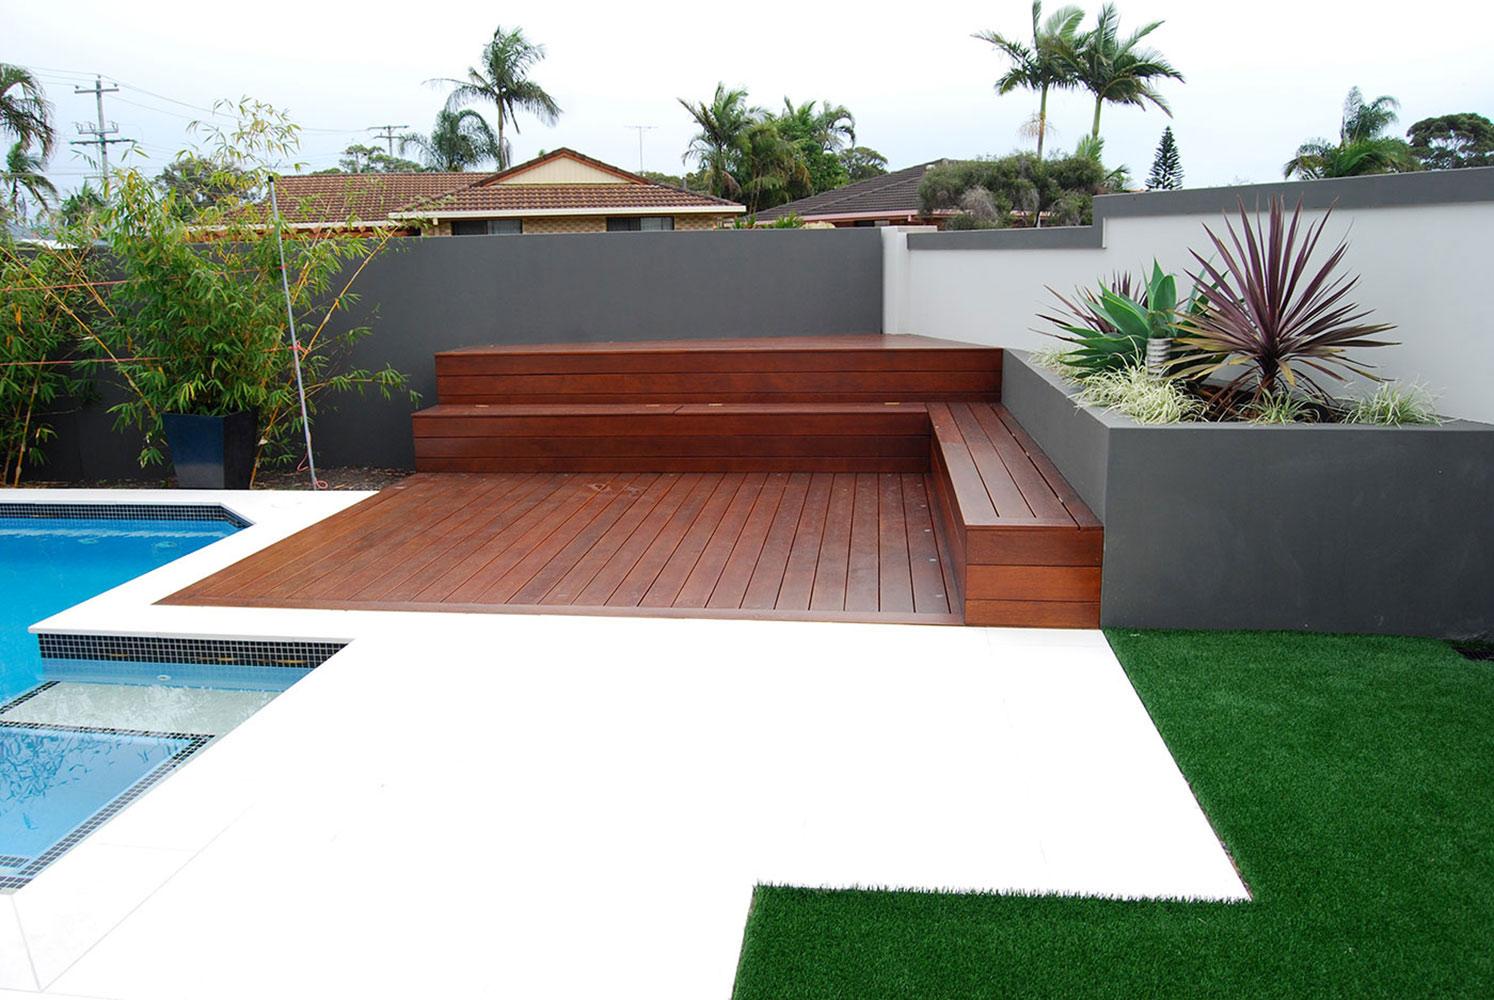 Why choose Merbau timber for your decking material?